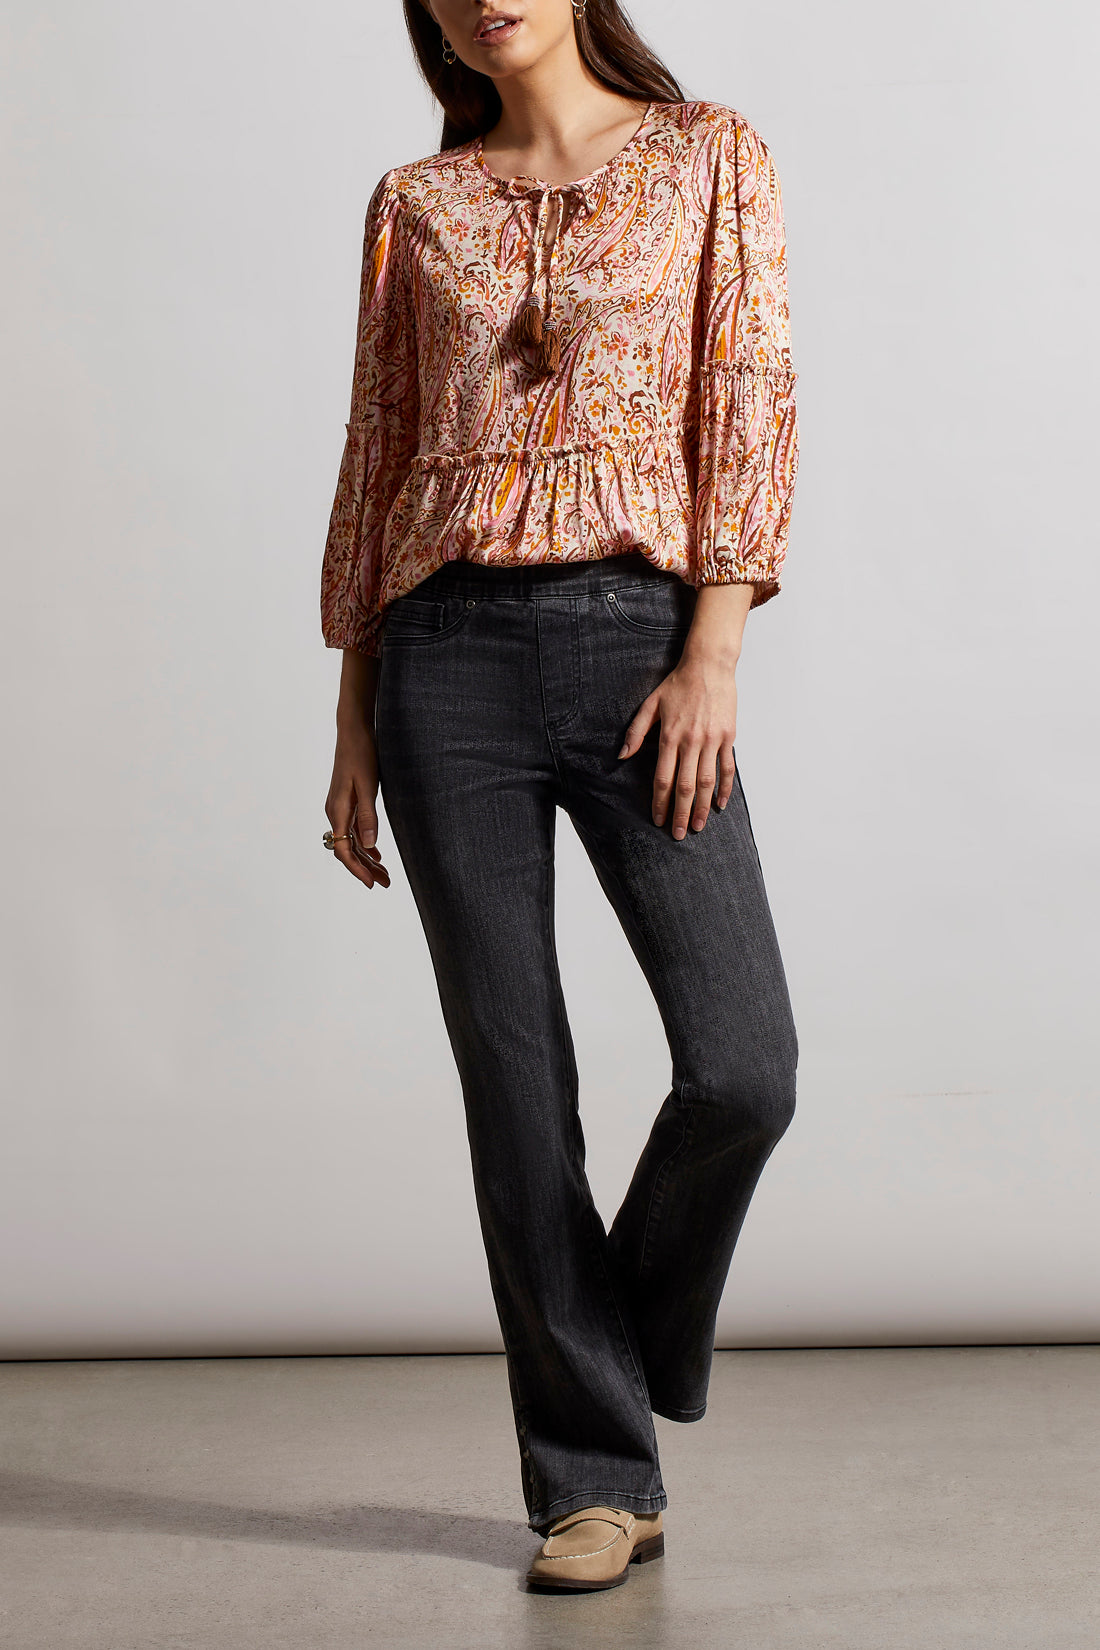 Audrey Pull On Microflare Jeans by Tribal